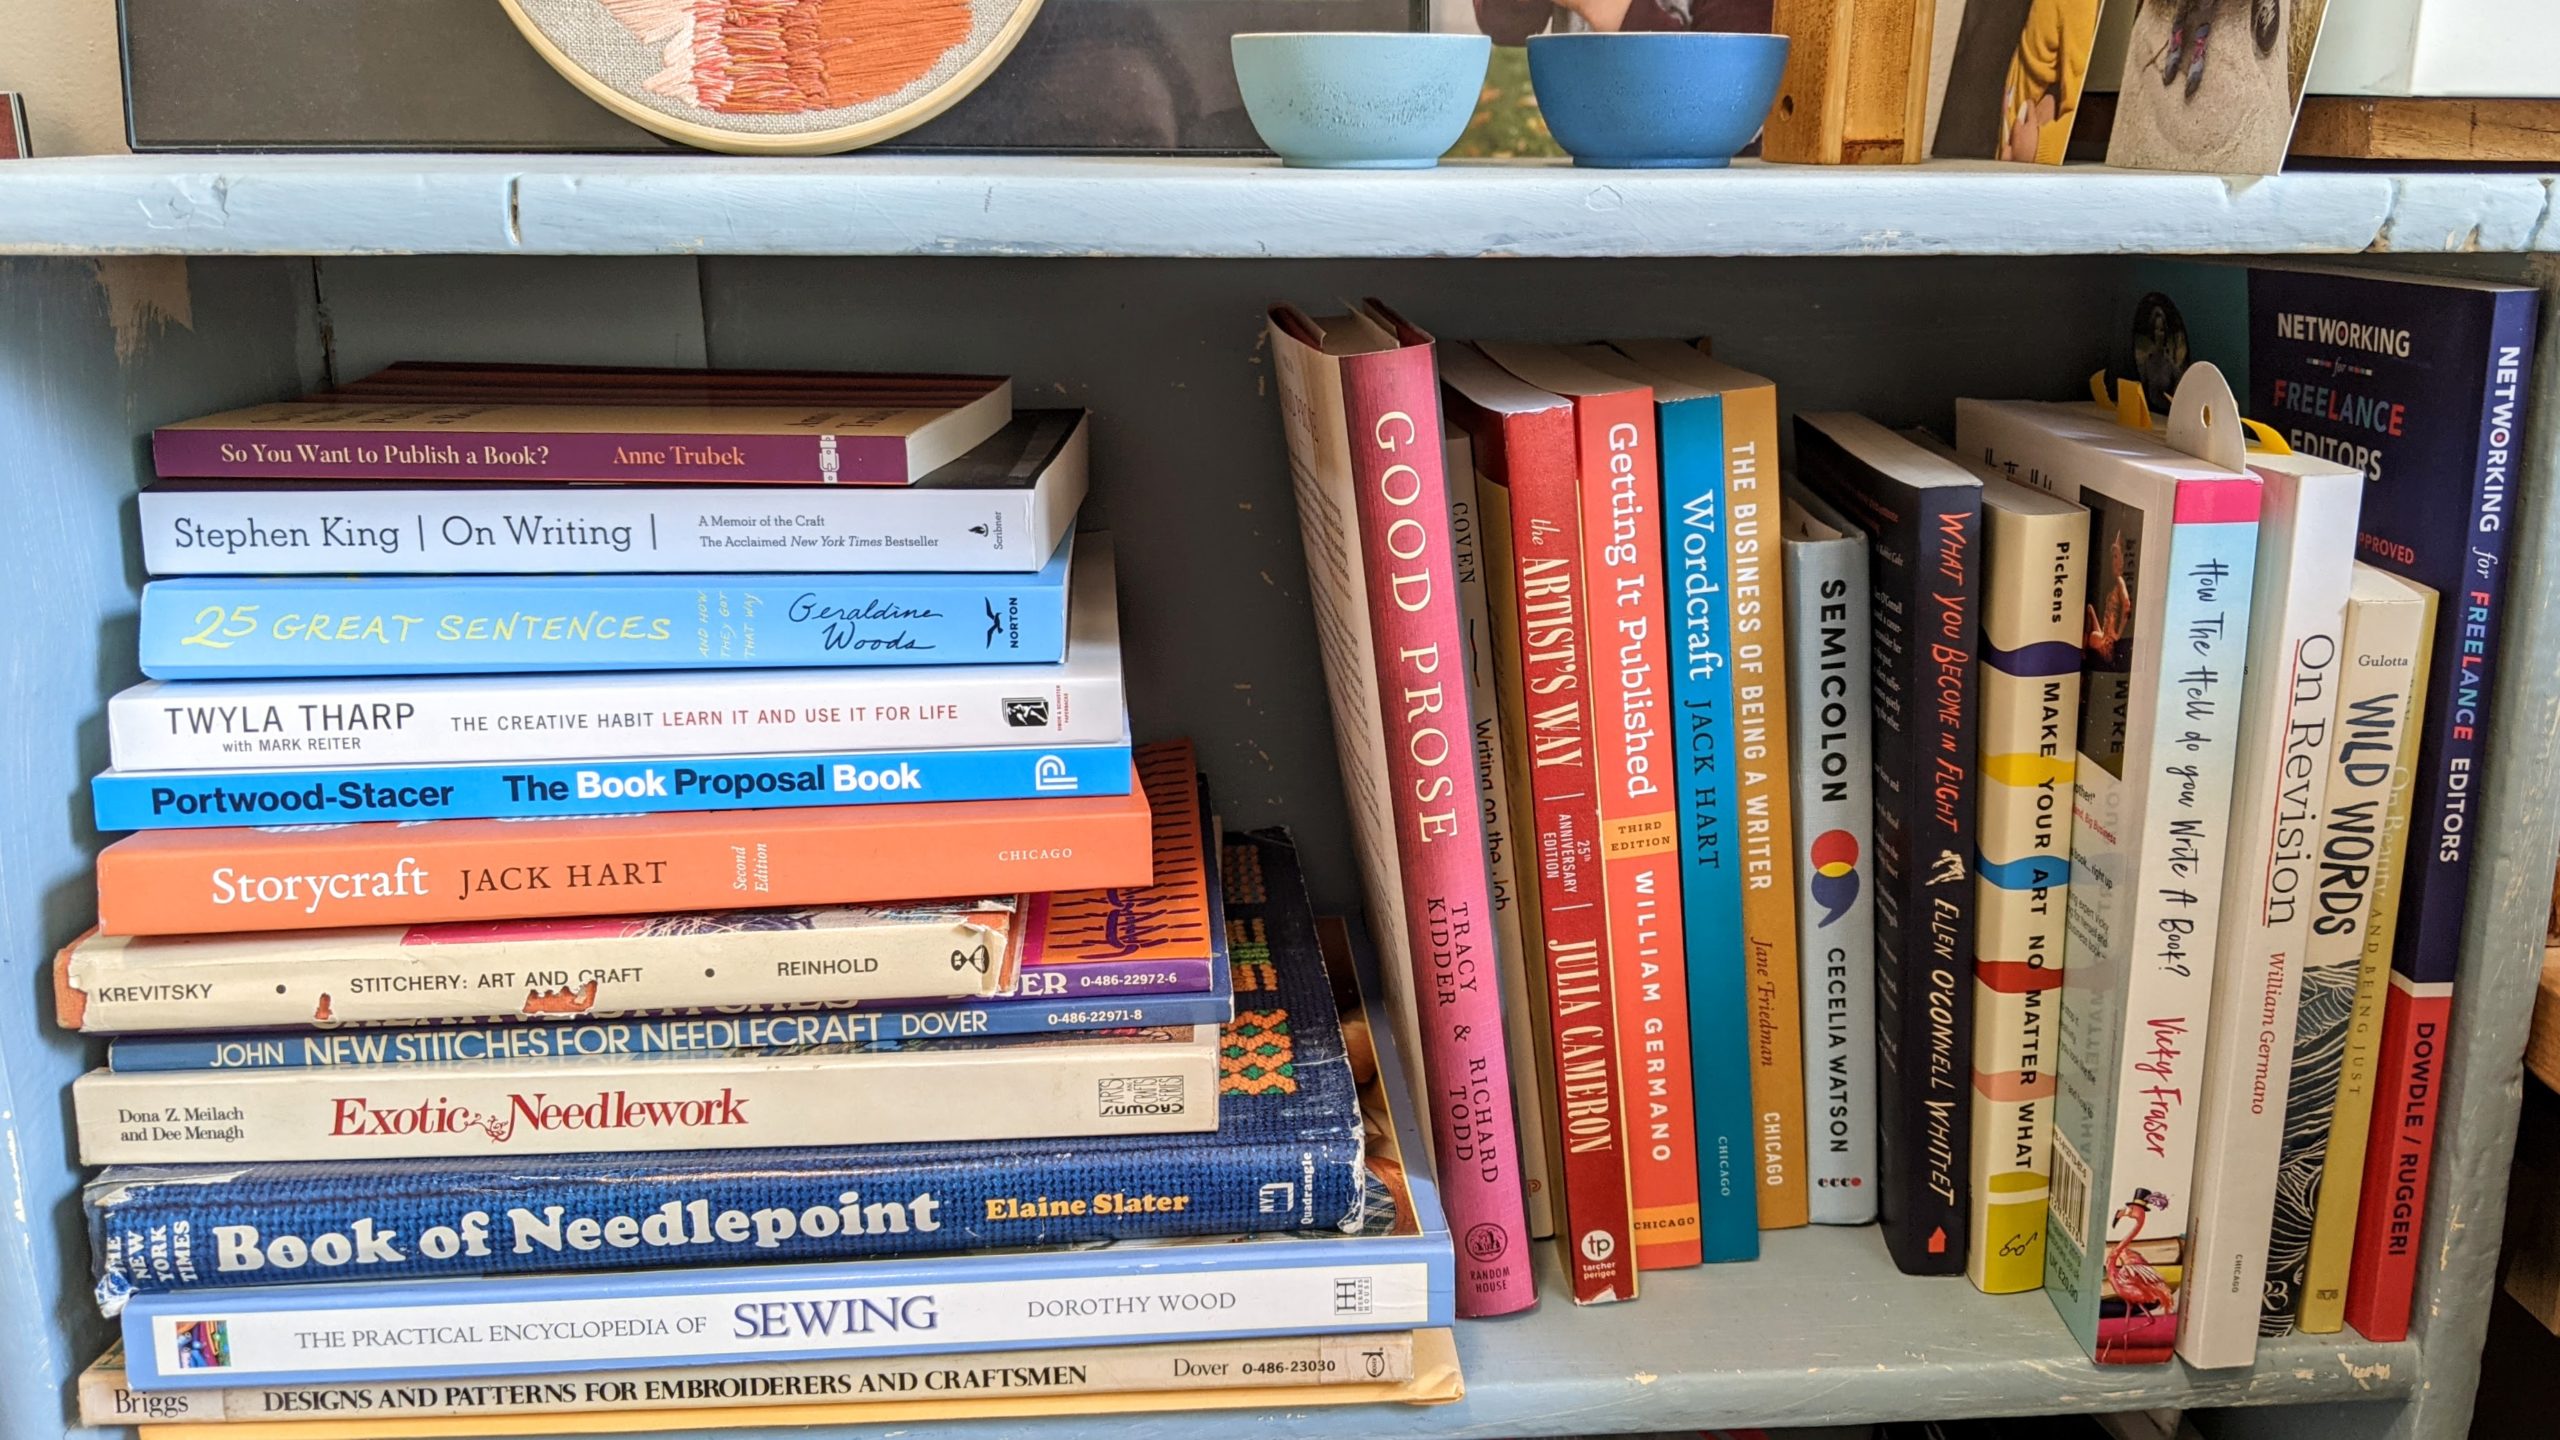 A pale blue, painted bookshelf. Some books on embroidery and needlepoint are stacked on their side with some writing craft books on top, and more writing and editing books are upright next to them. On top of the bookshelf, the bottom edge of an embroidery piece, two tiny wooden bowls, and several photographs are visible.